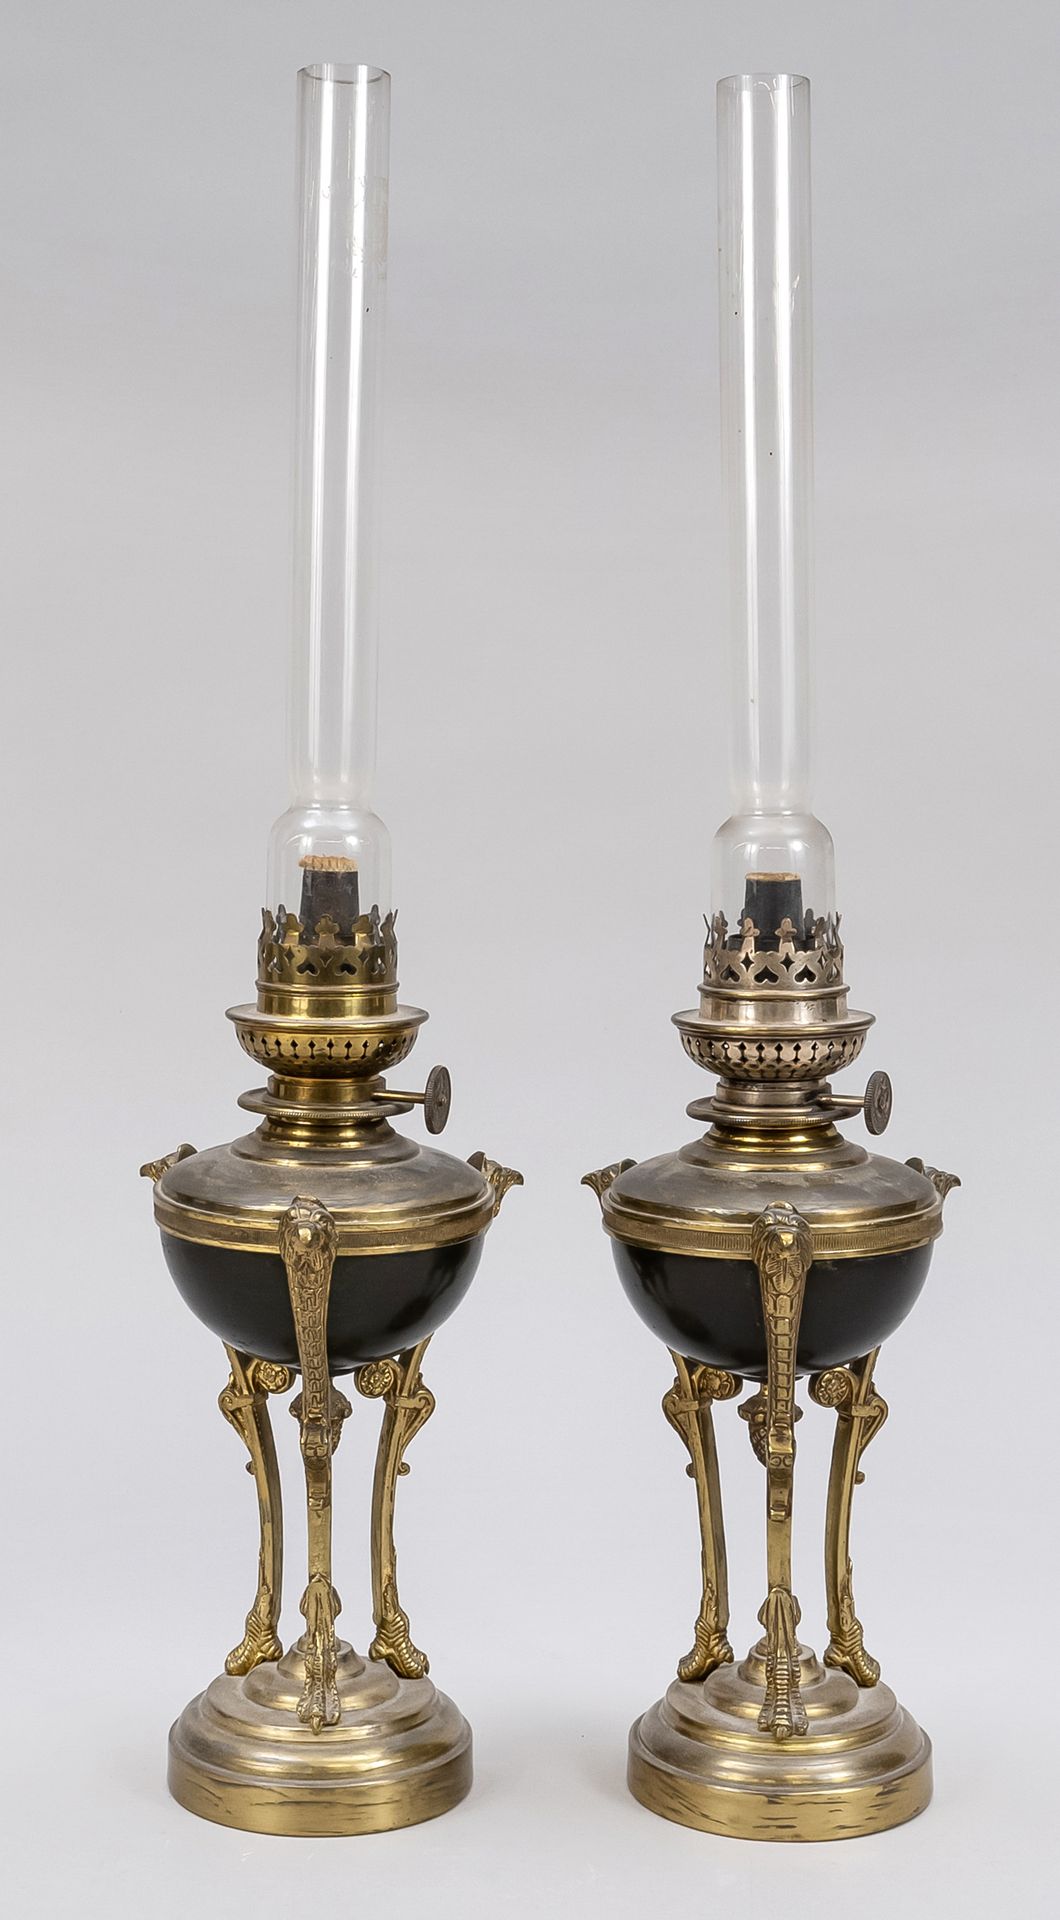 Null Pair of Empire style petroleum lamps, 19th c., gilt bronze, brass, glass. R&hellip;